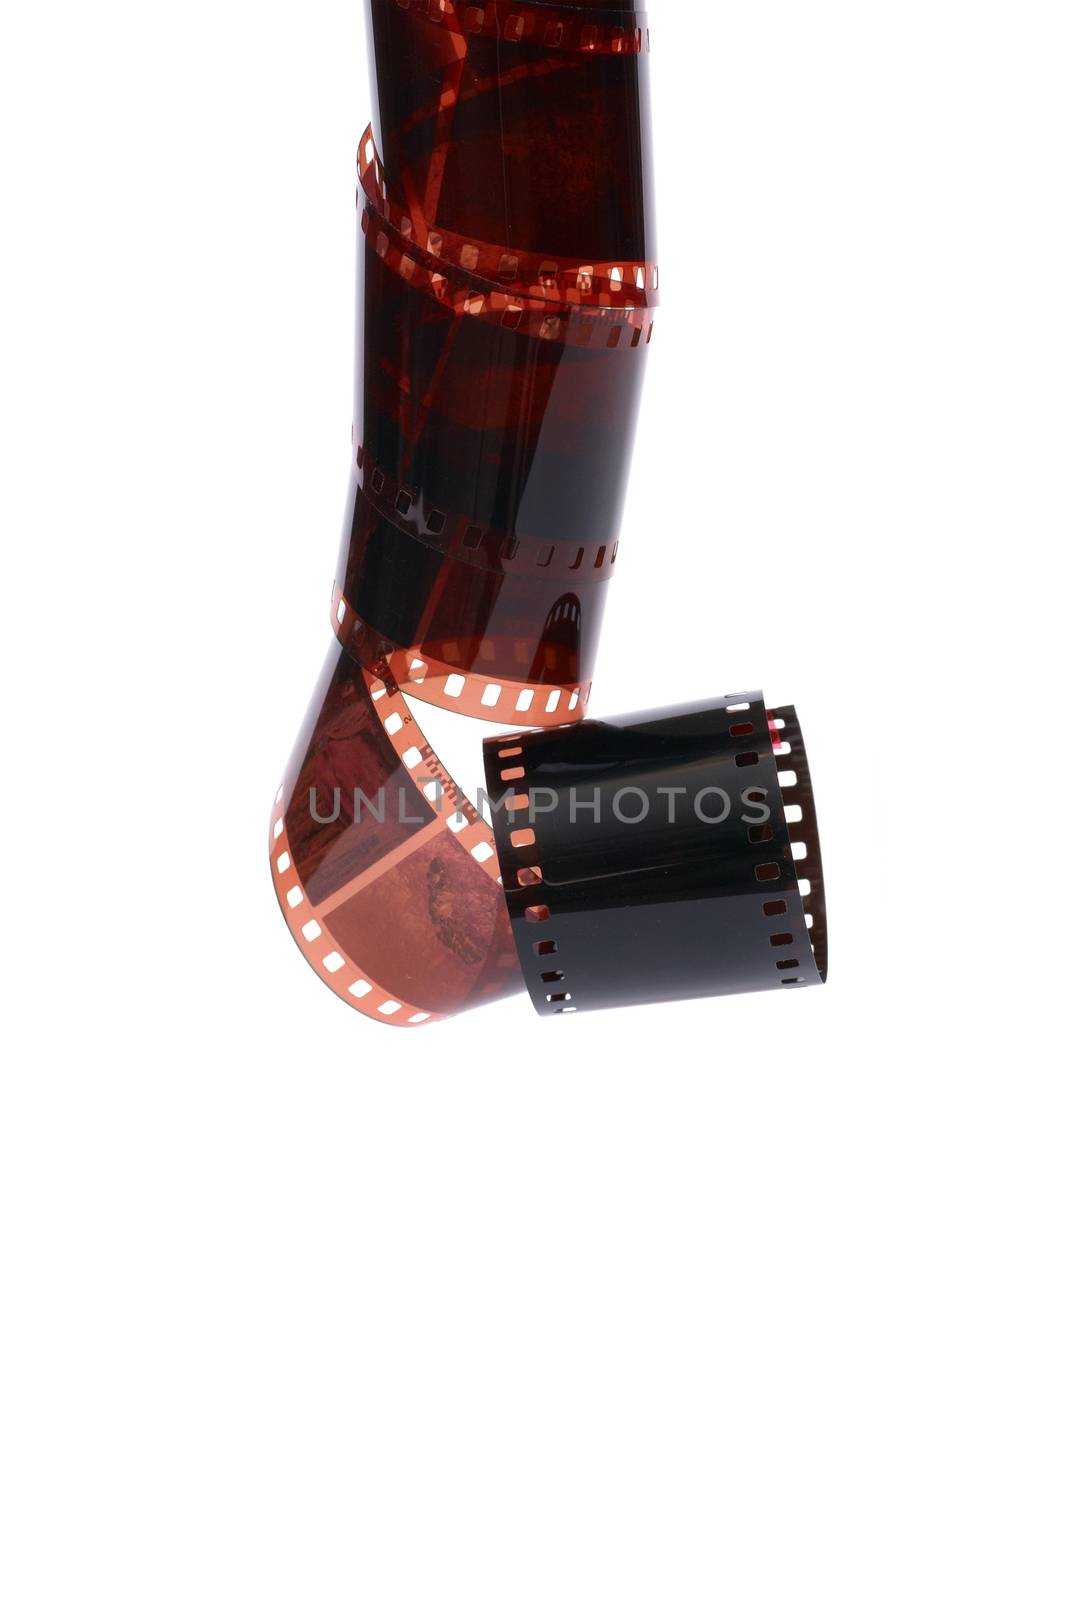 Photographic film isolated on the white background